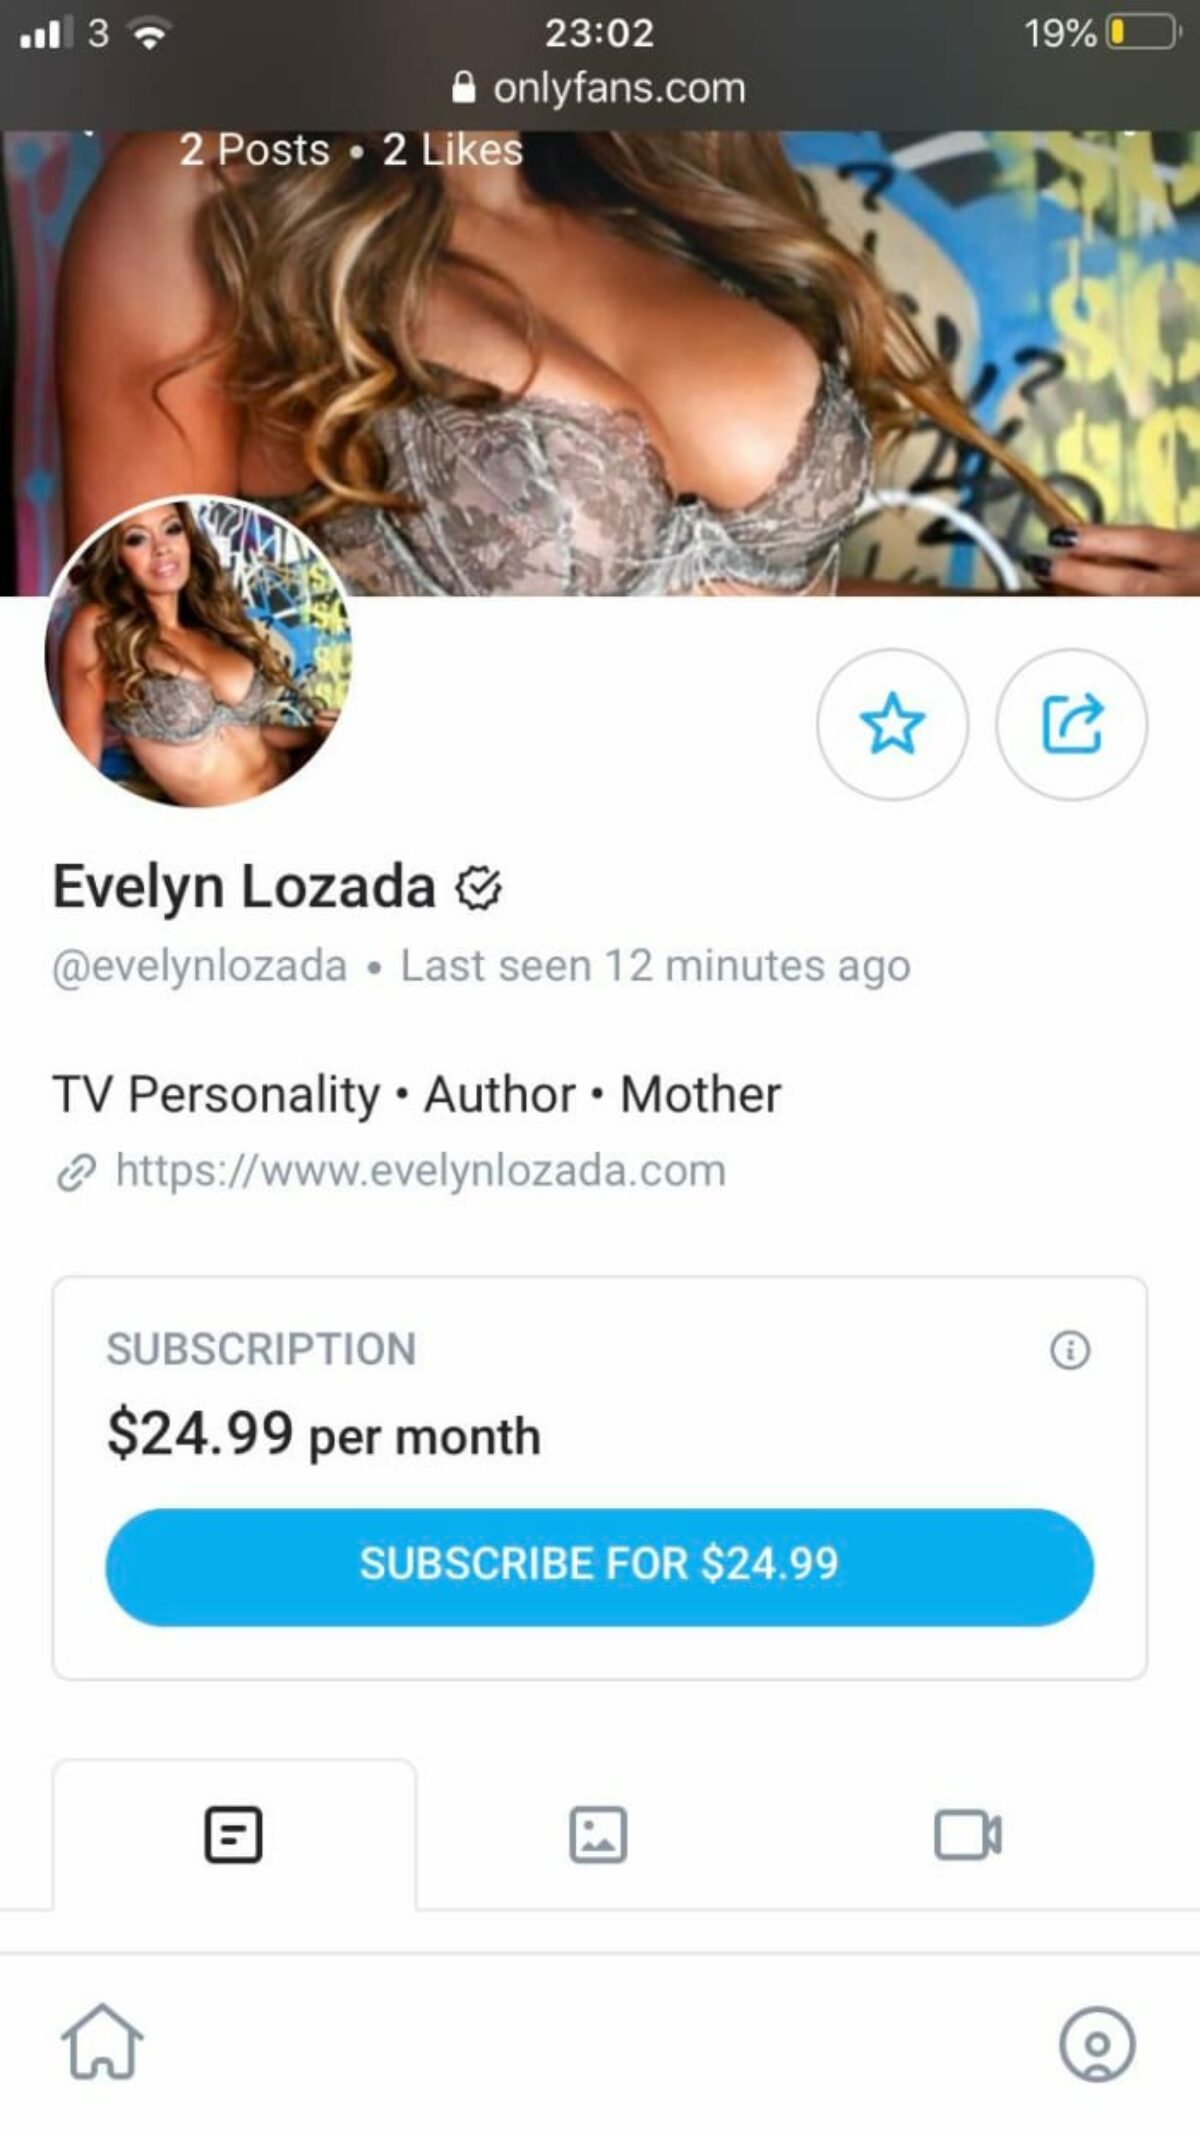 Evelyn lozada only fans